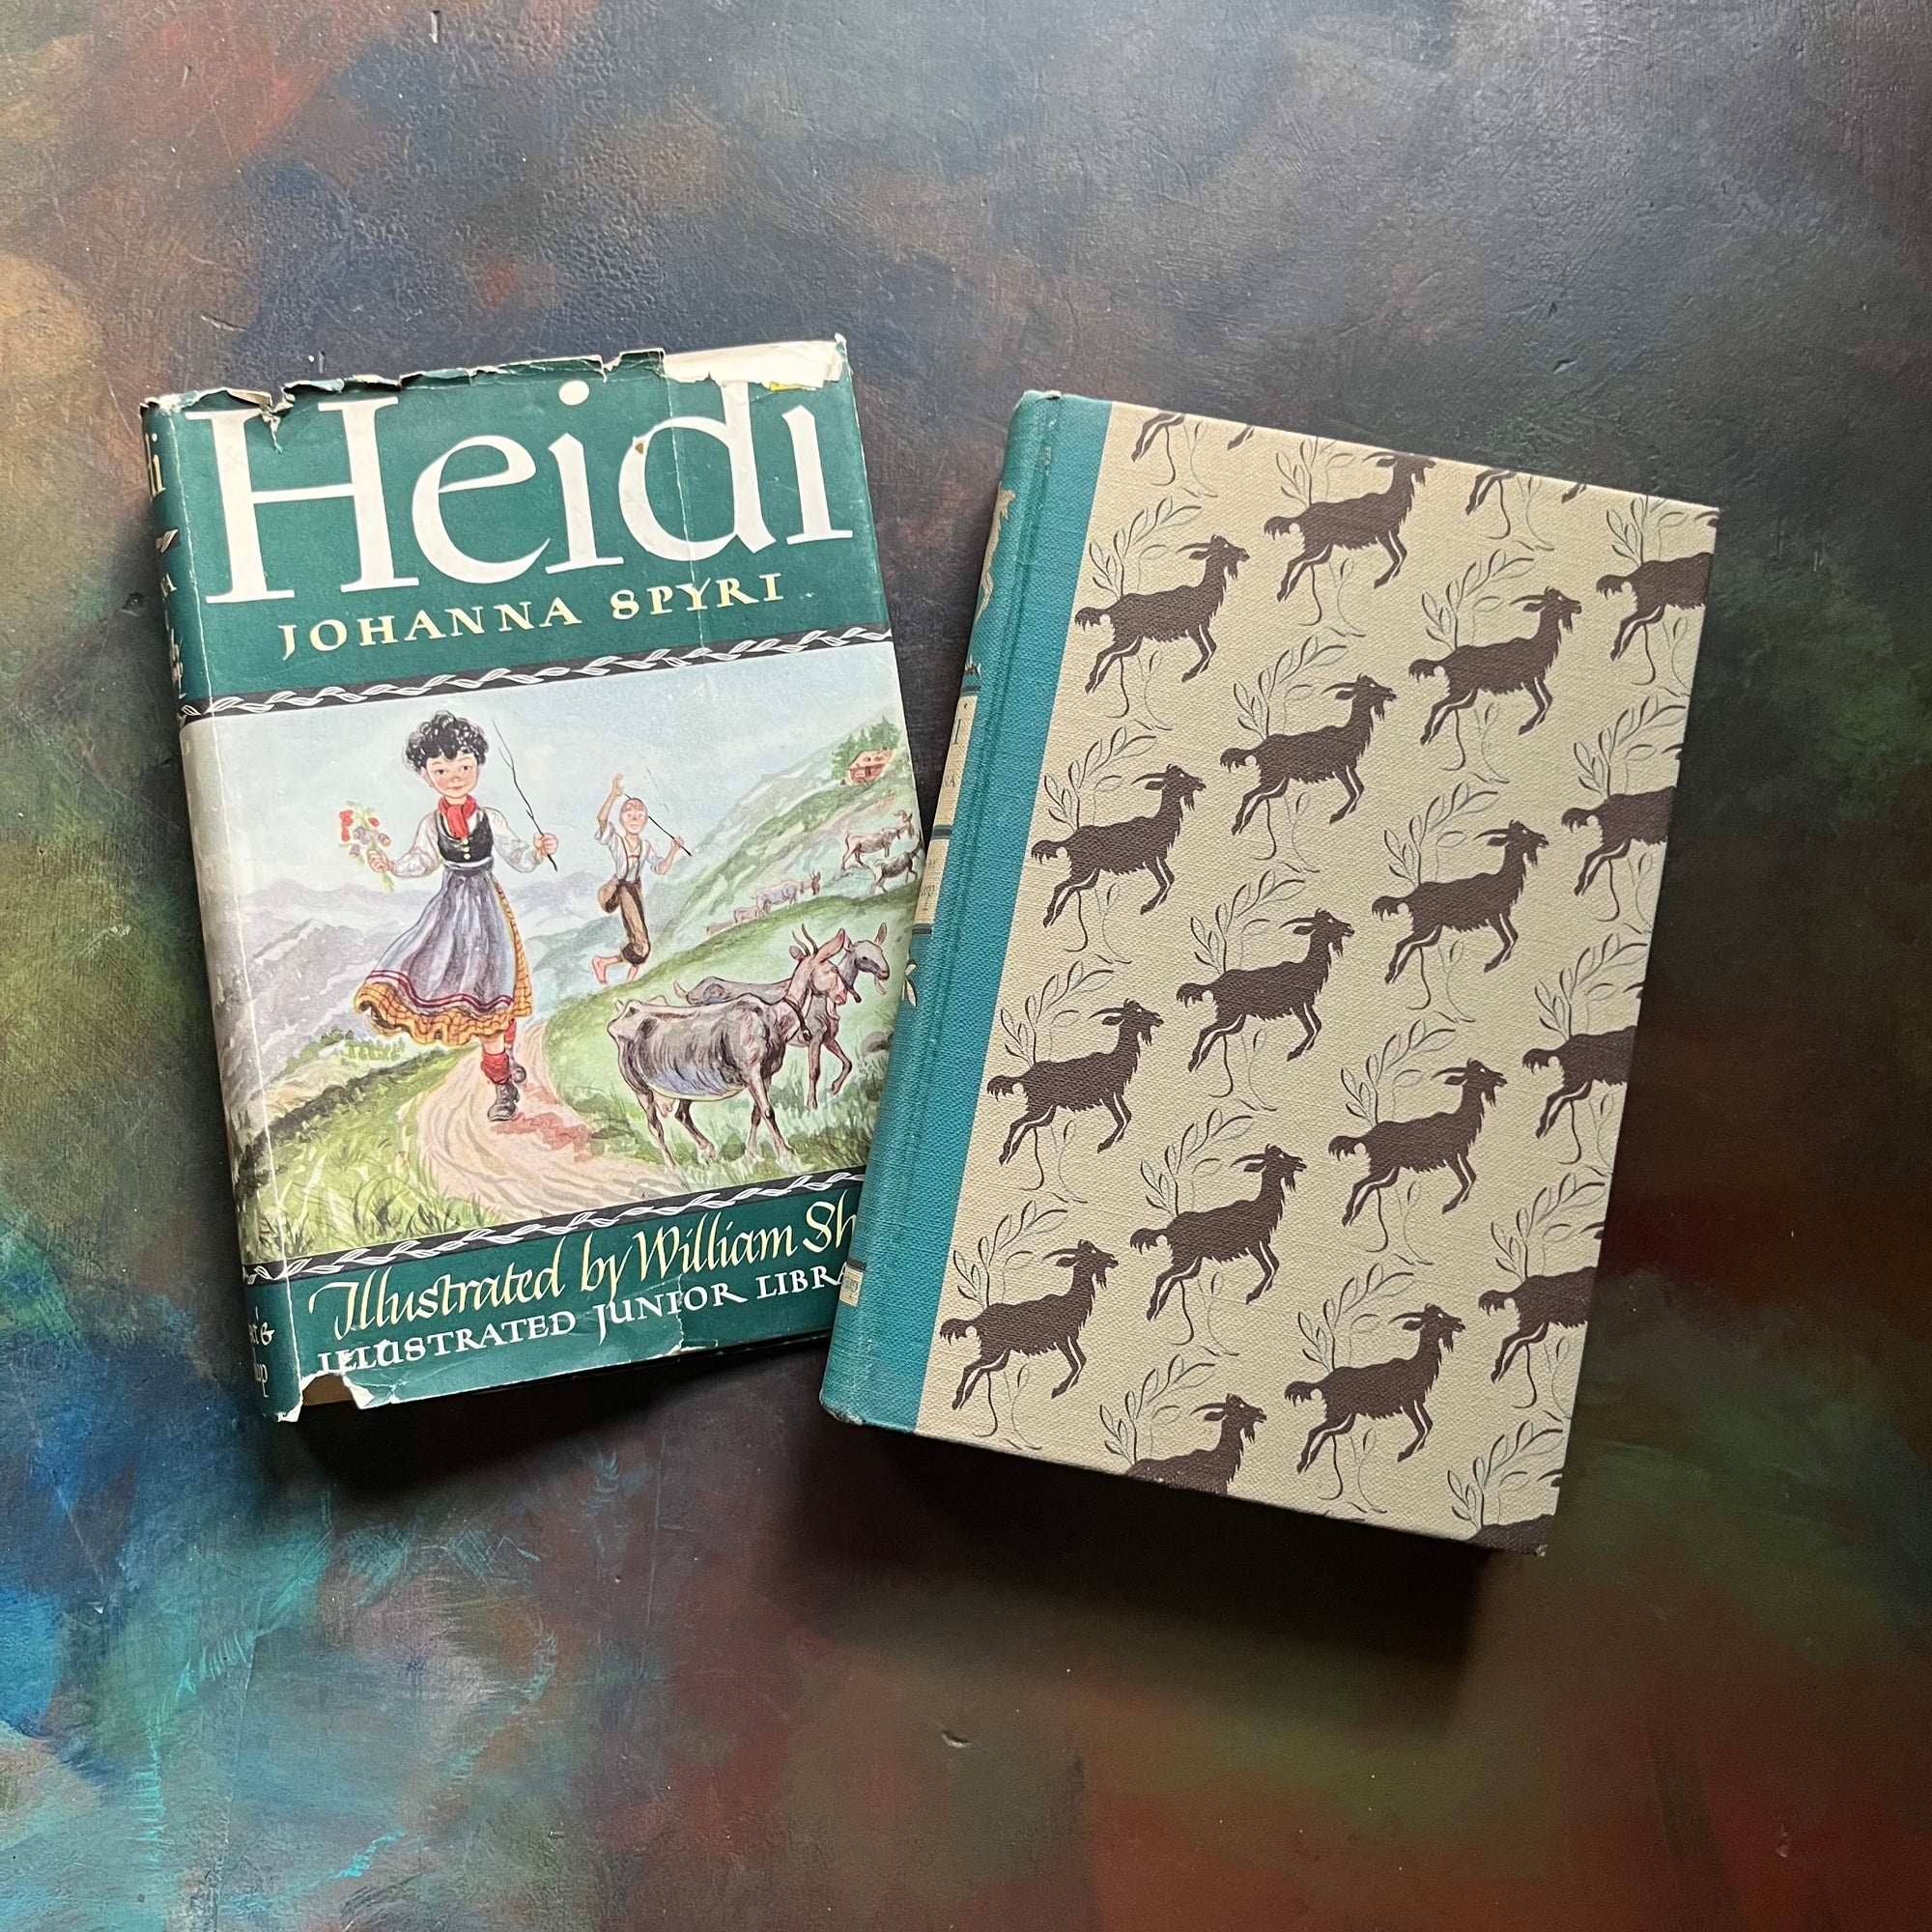 Illustrated Junior Library Editions-Heidi by Johanna Spyri with illustrations by William Sharp-vintage children's classic literature-view of the front cover with a repeating goat pattern shown